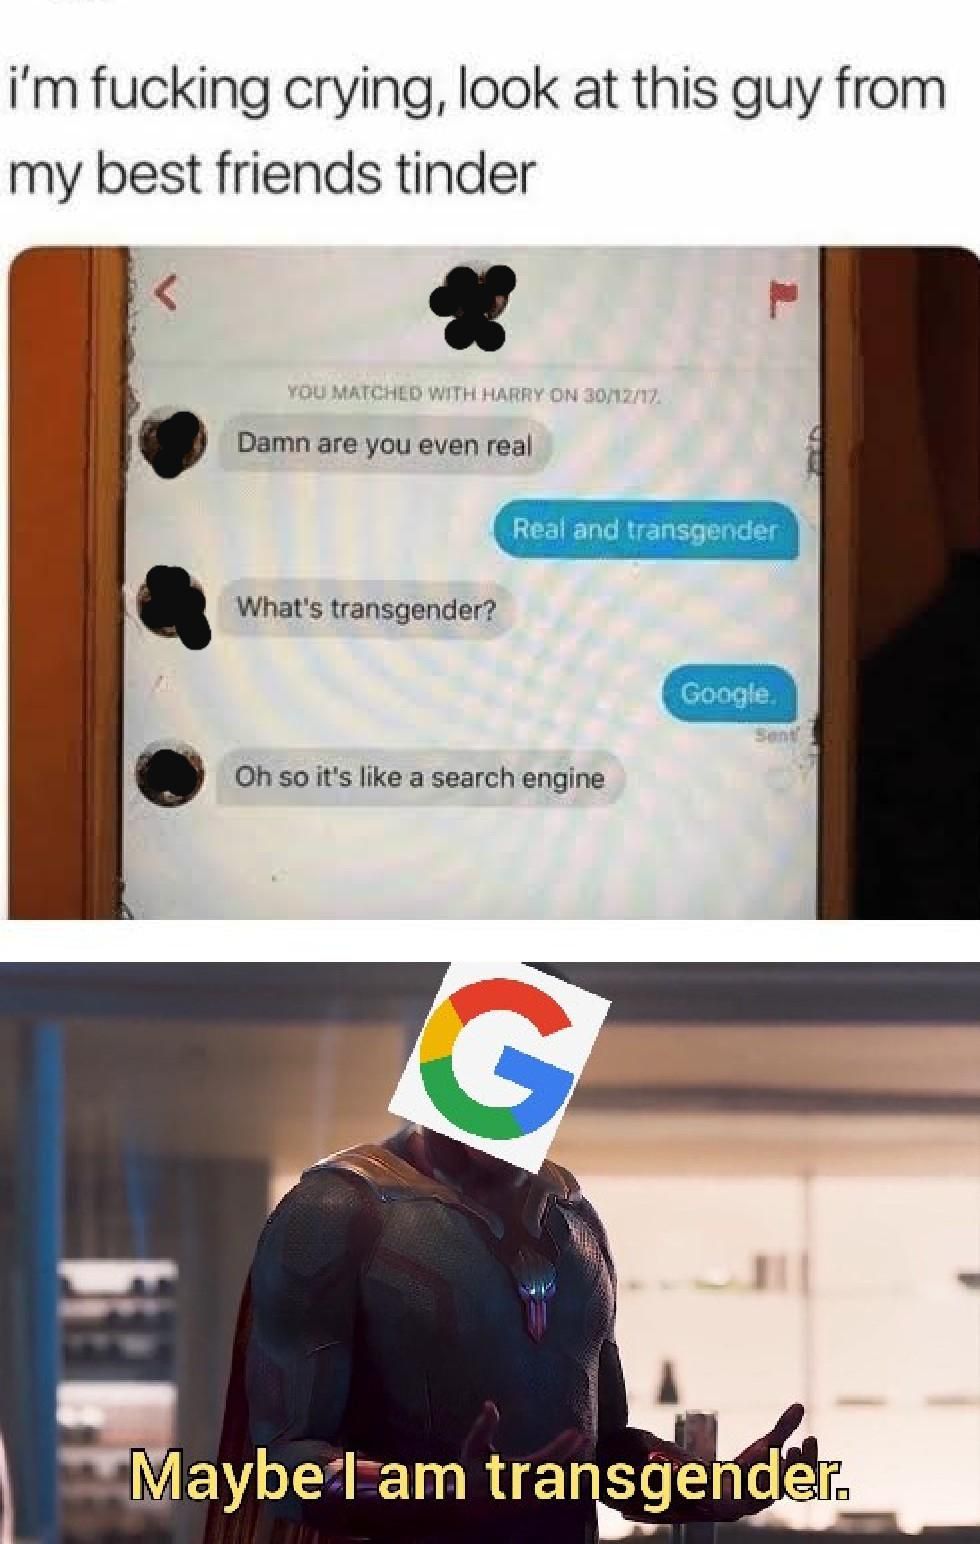 When did Google have a sex reassignment?